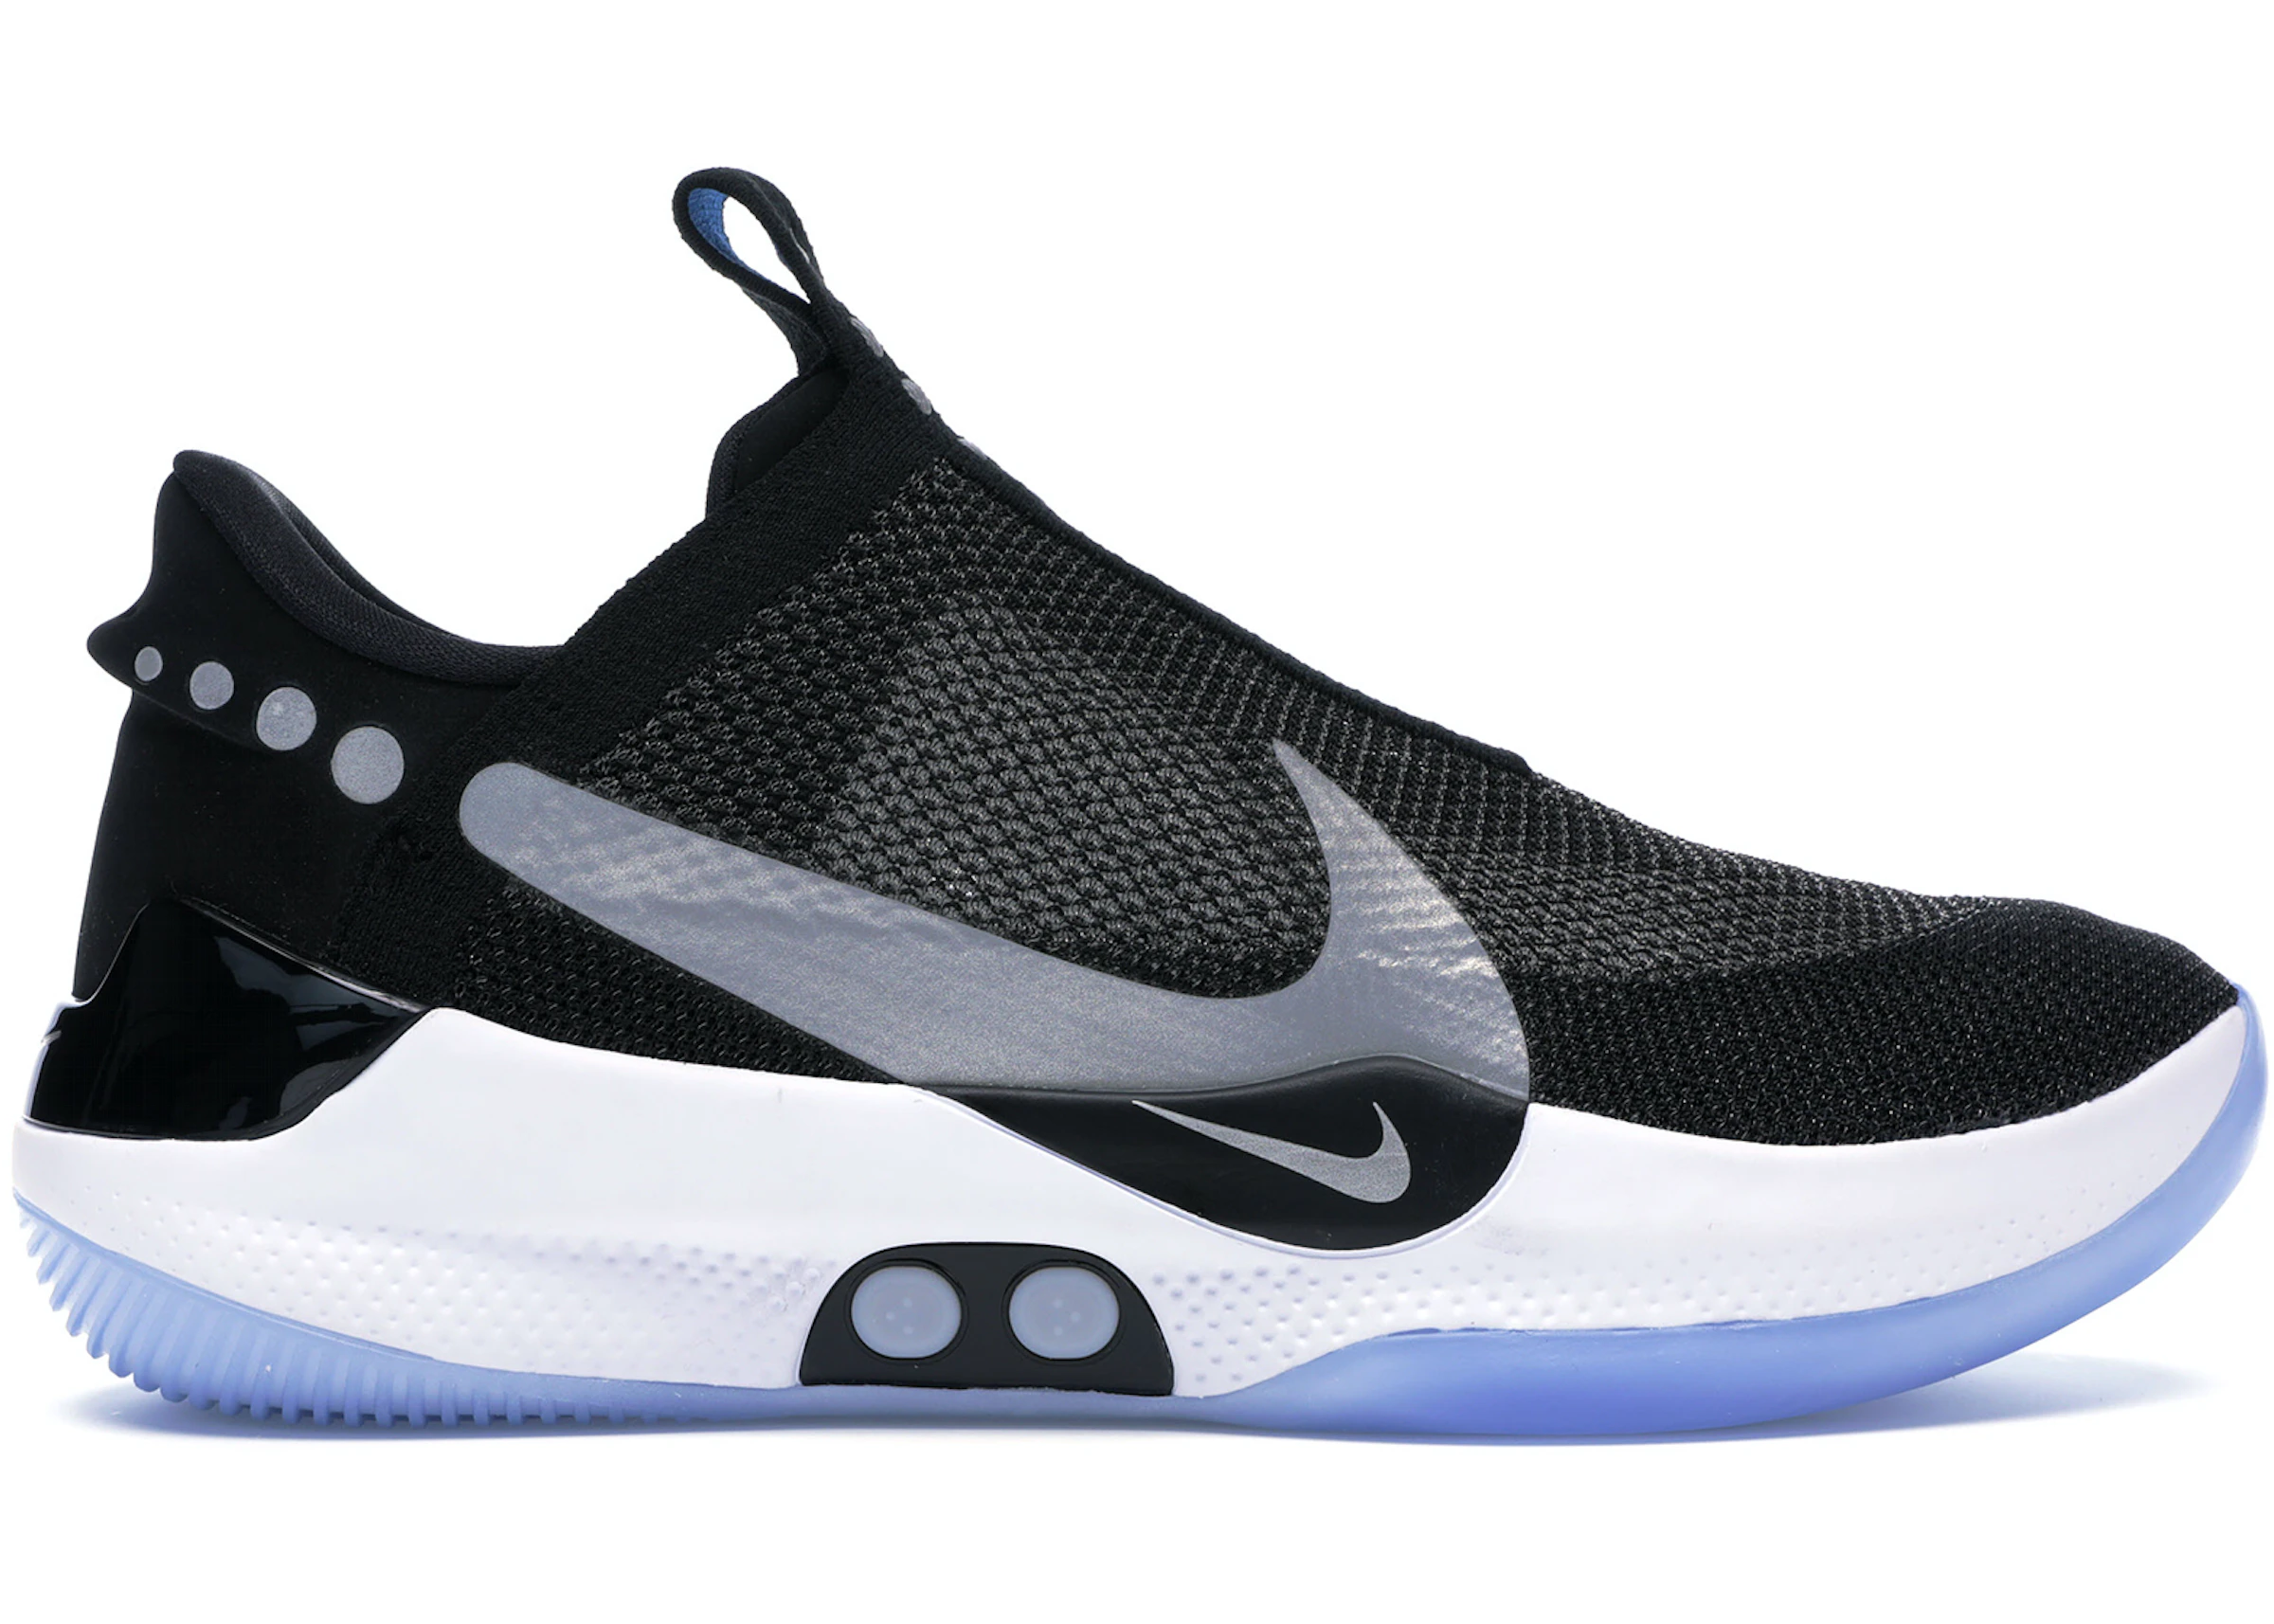 Whose stand out cool Nike Adapt BB Black Pure Platinum (US Charger) - AO2582-001 - US